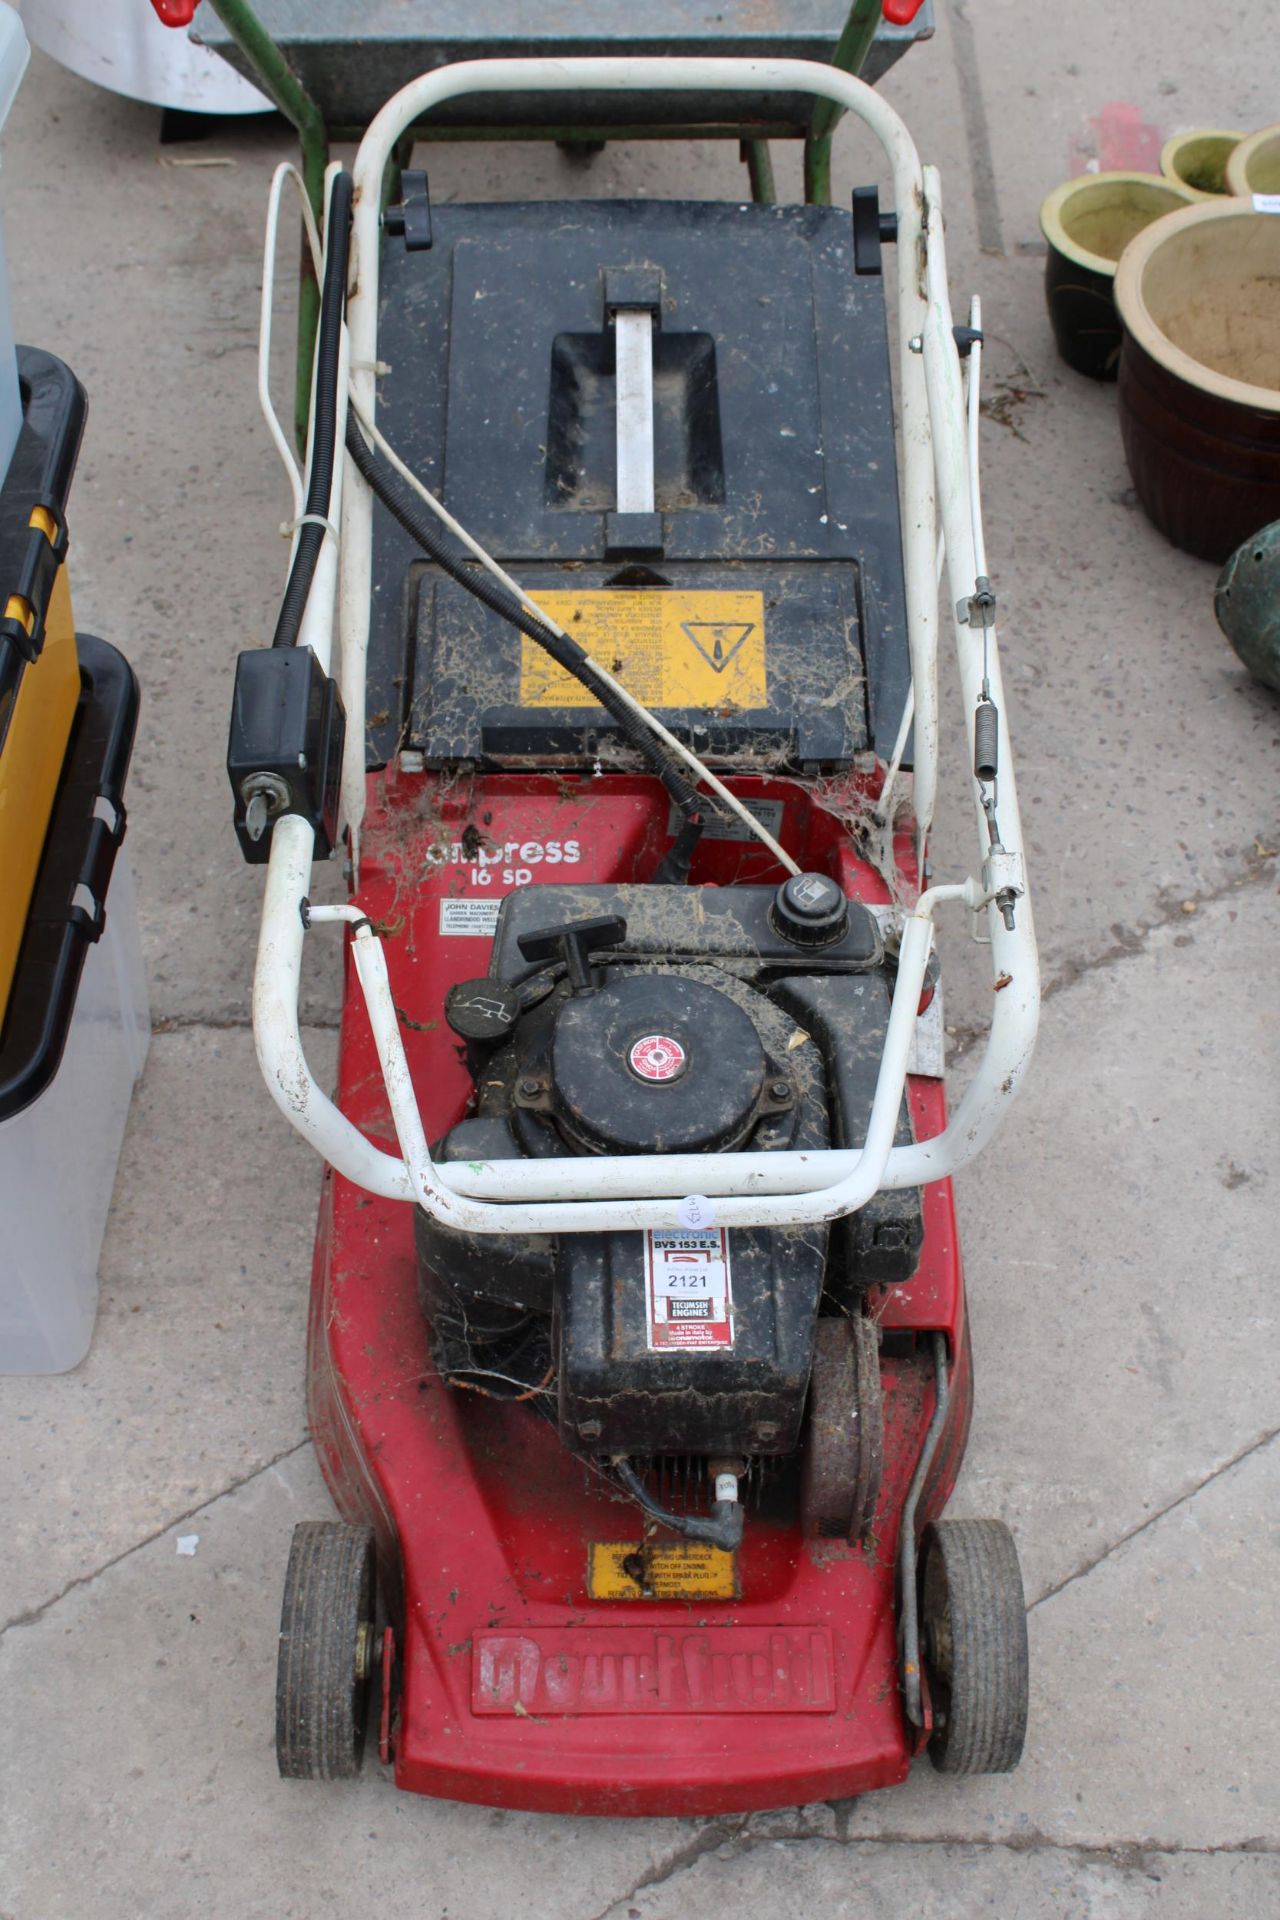 A MOUNTFIELD PETROL ENGINE LAWN MOWER WITH GRASS BOX